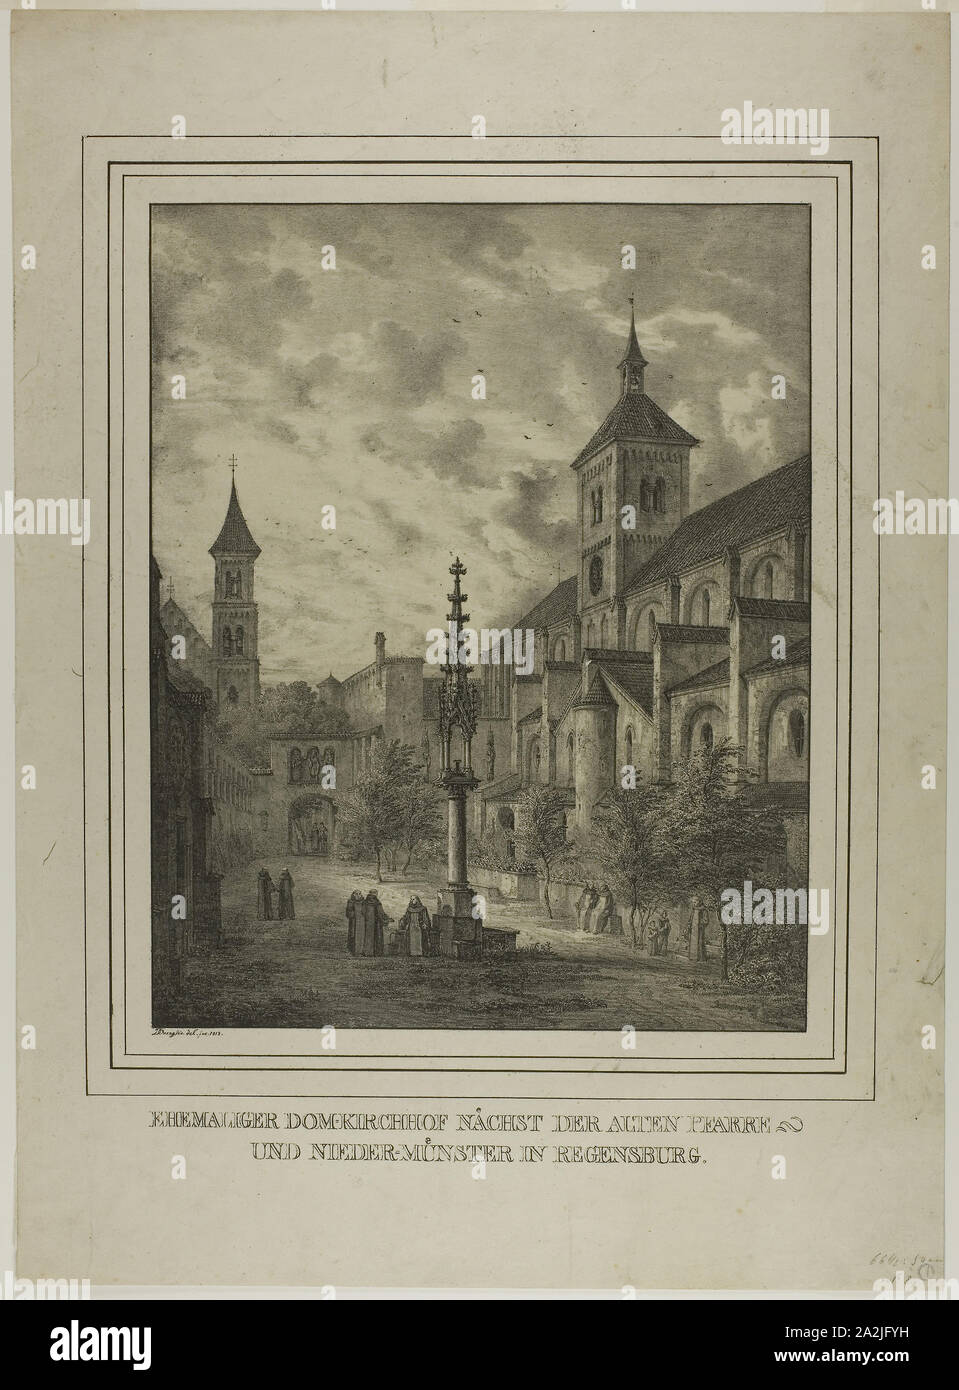 Former Cathedral Churchyard near the Old Rectory and Minster in Regensberg, 1818, Domenico Quaglio II, German, 1787-1837, Germany, Lithograph with tone plate, on paper, 410 x 325 mm (image), 633 x 460 mm (sheet Stock Photo